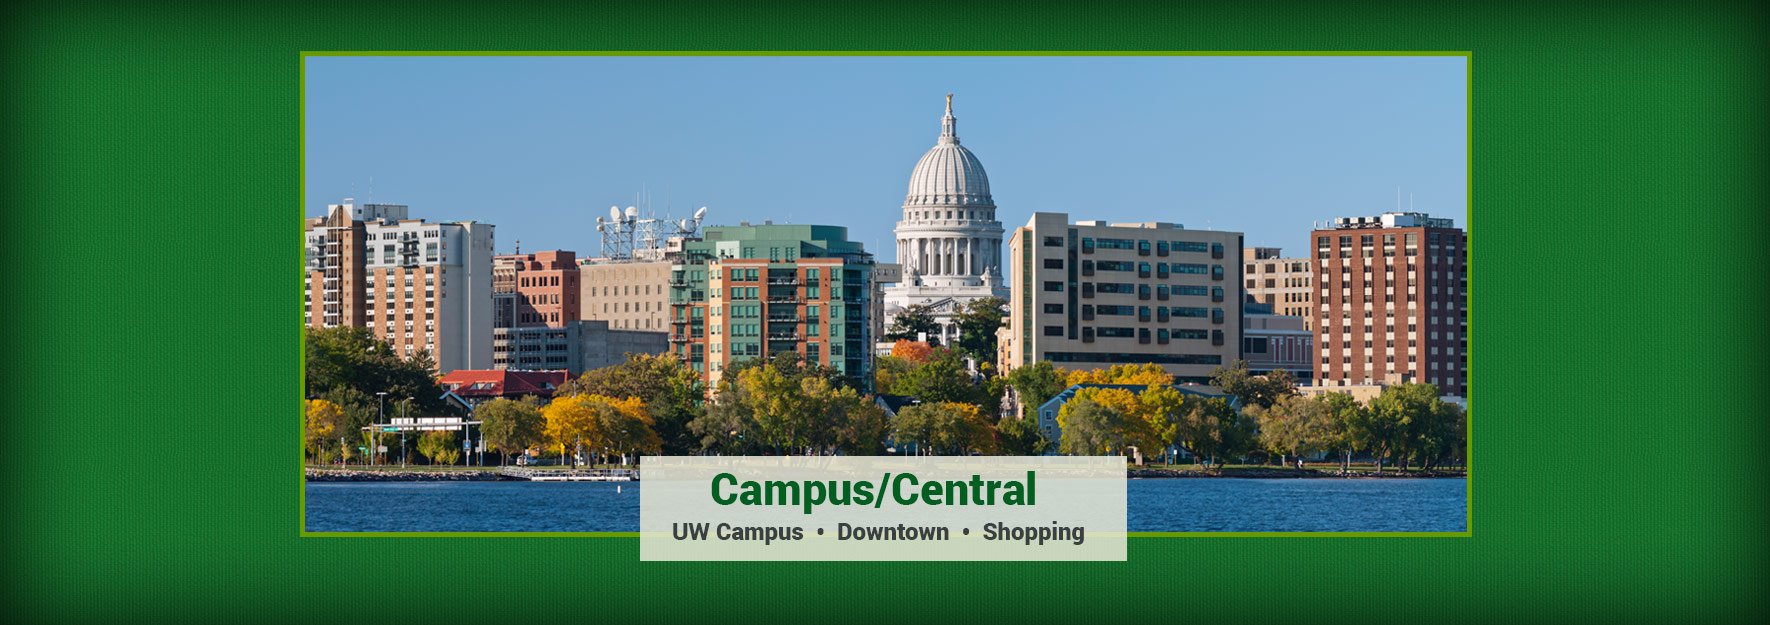 Campus/Central Properties